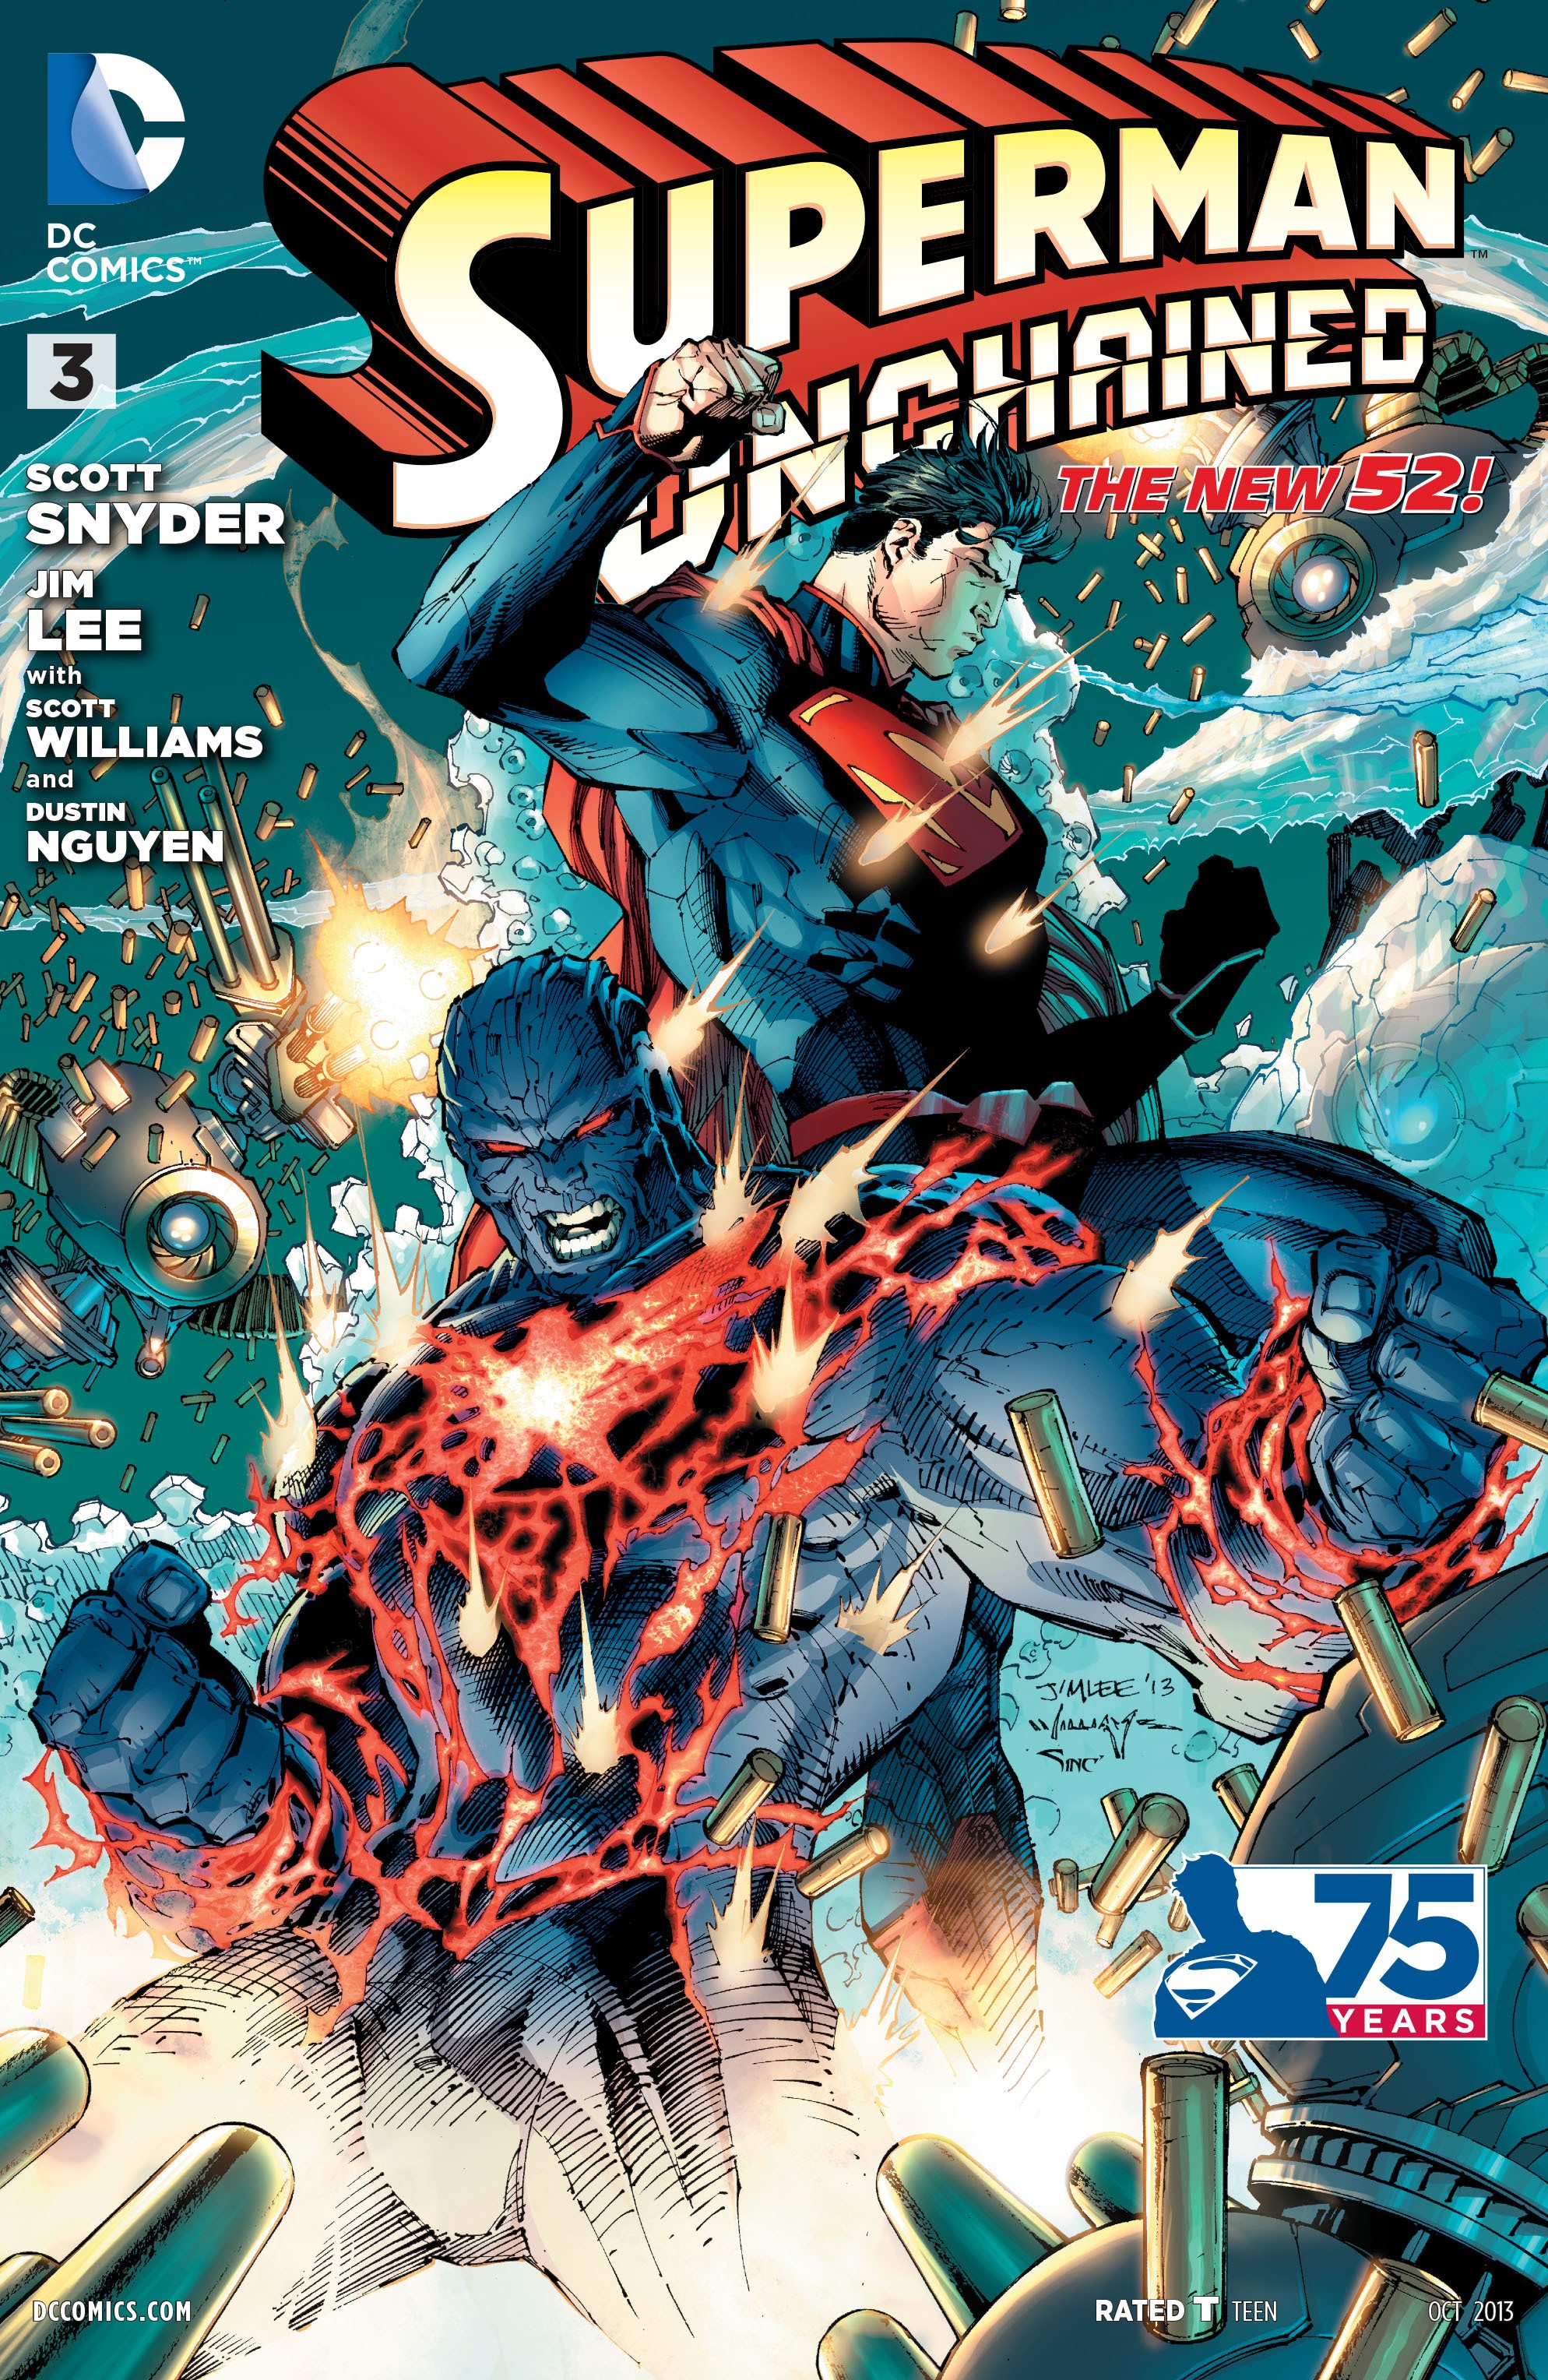 Superman Unchained Vol. 1 #3